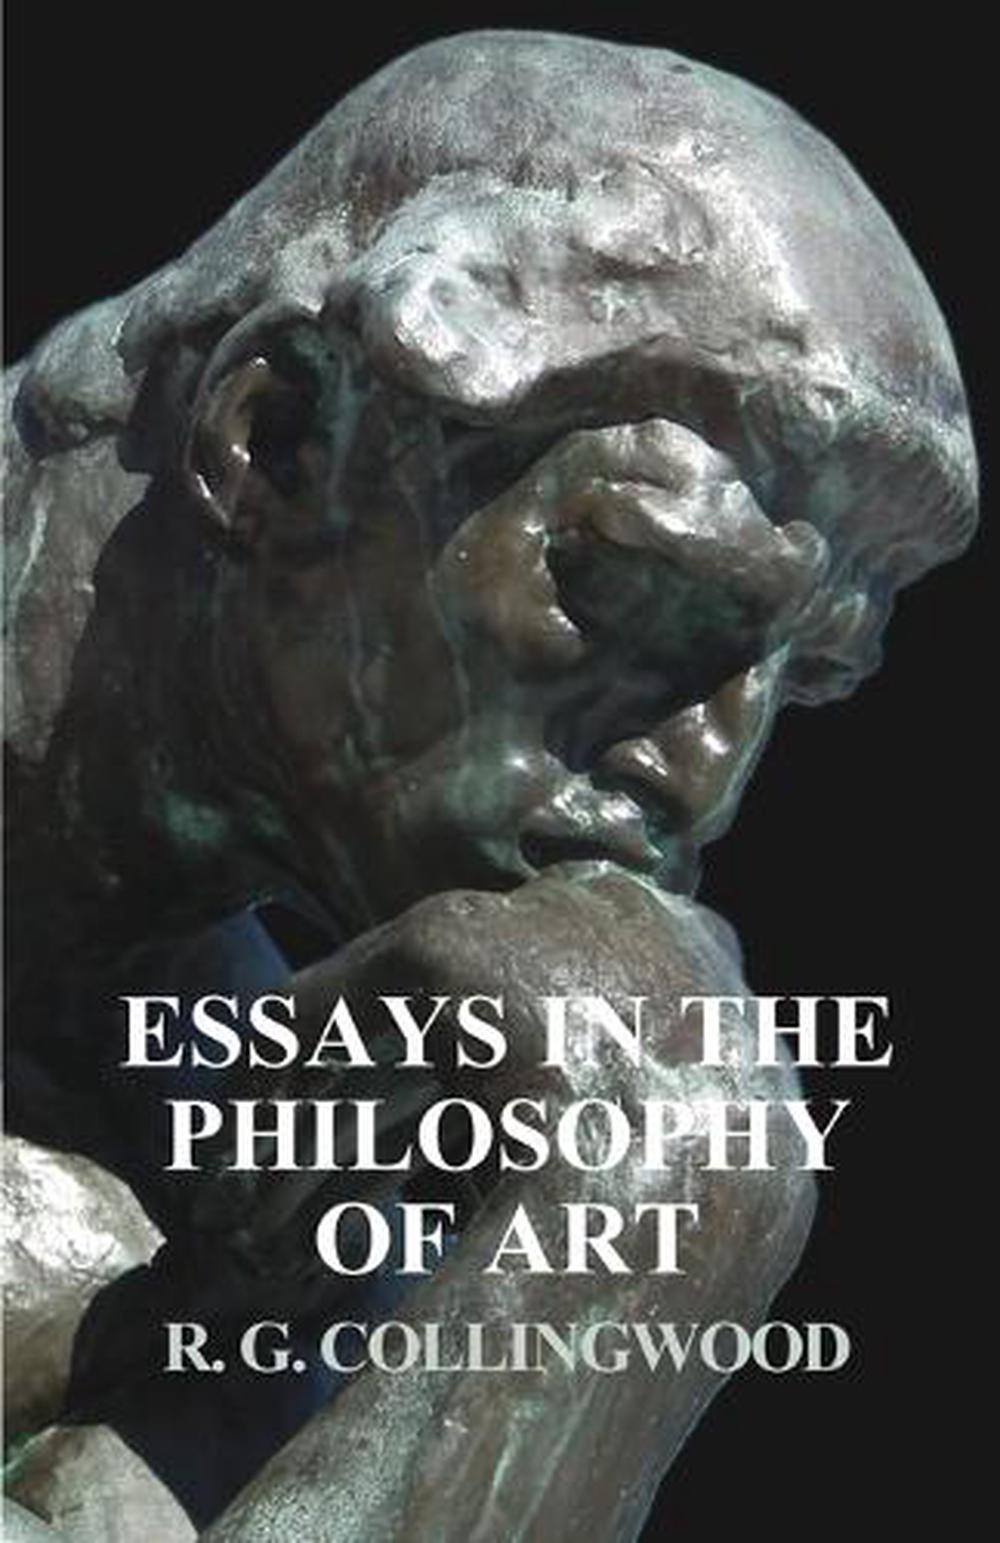 essays on the philosophy and history of art